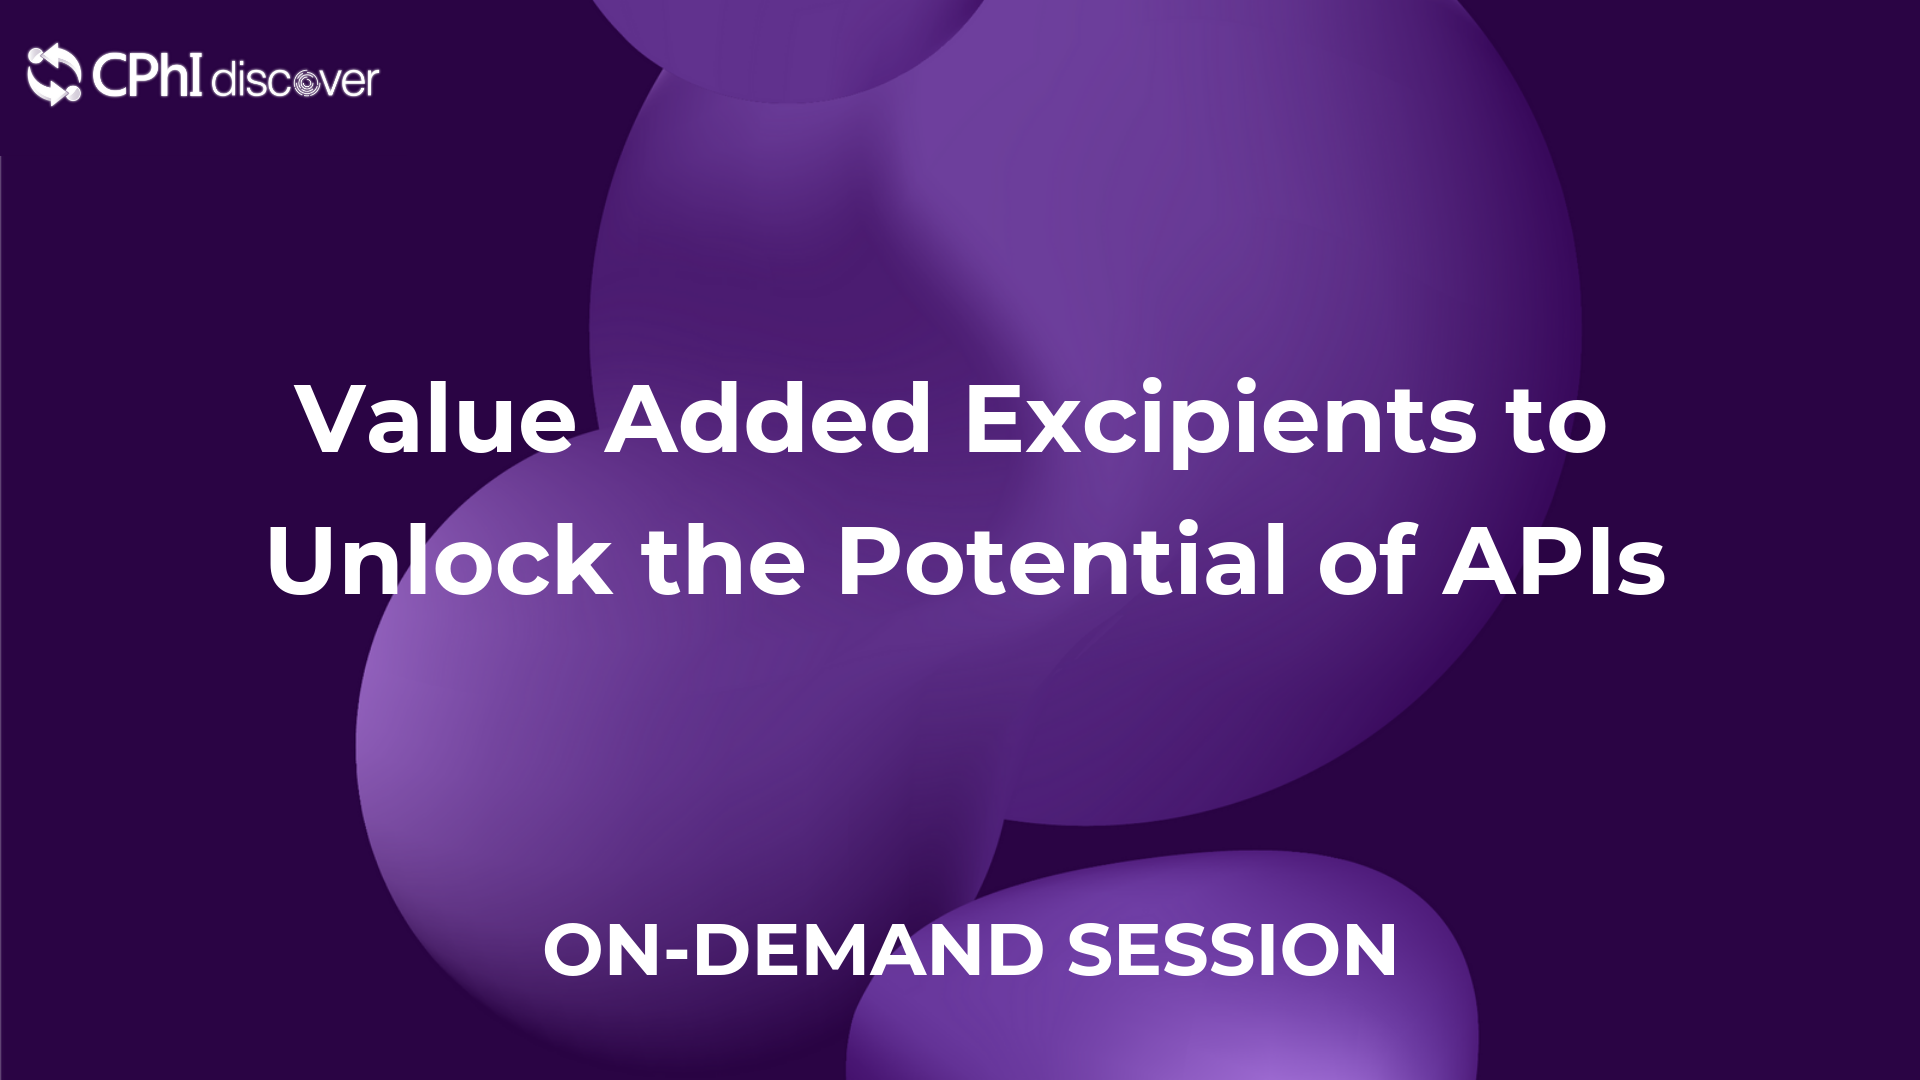 Value Added Excipients to Unlock the Potential of APIs